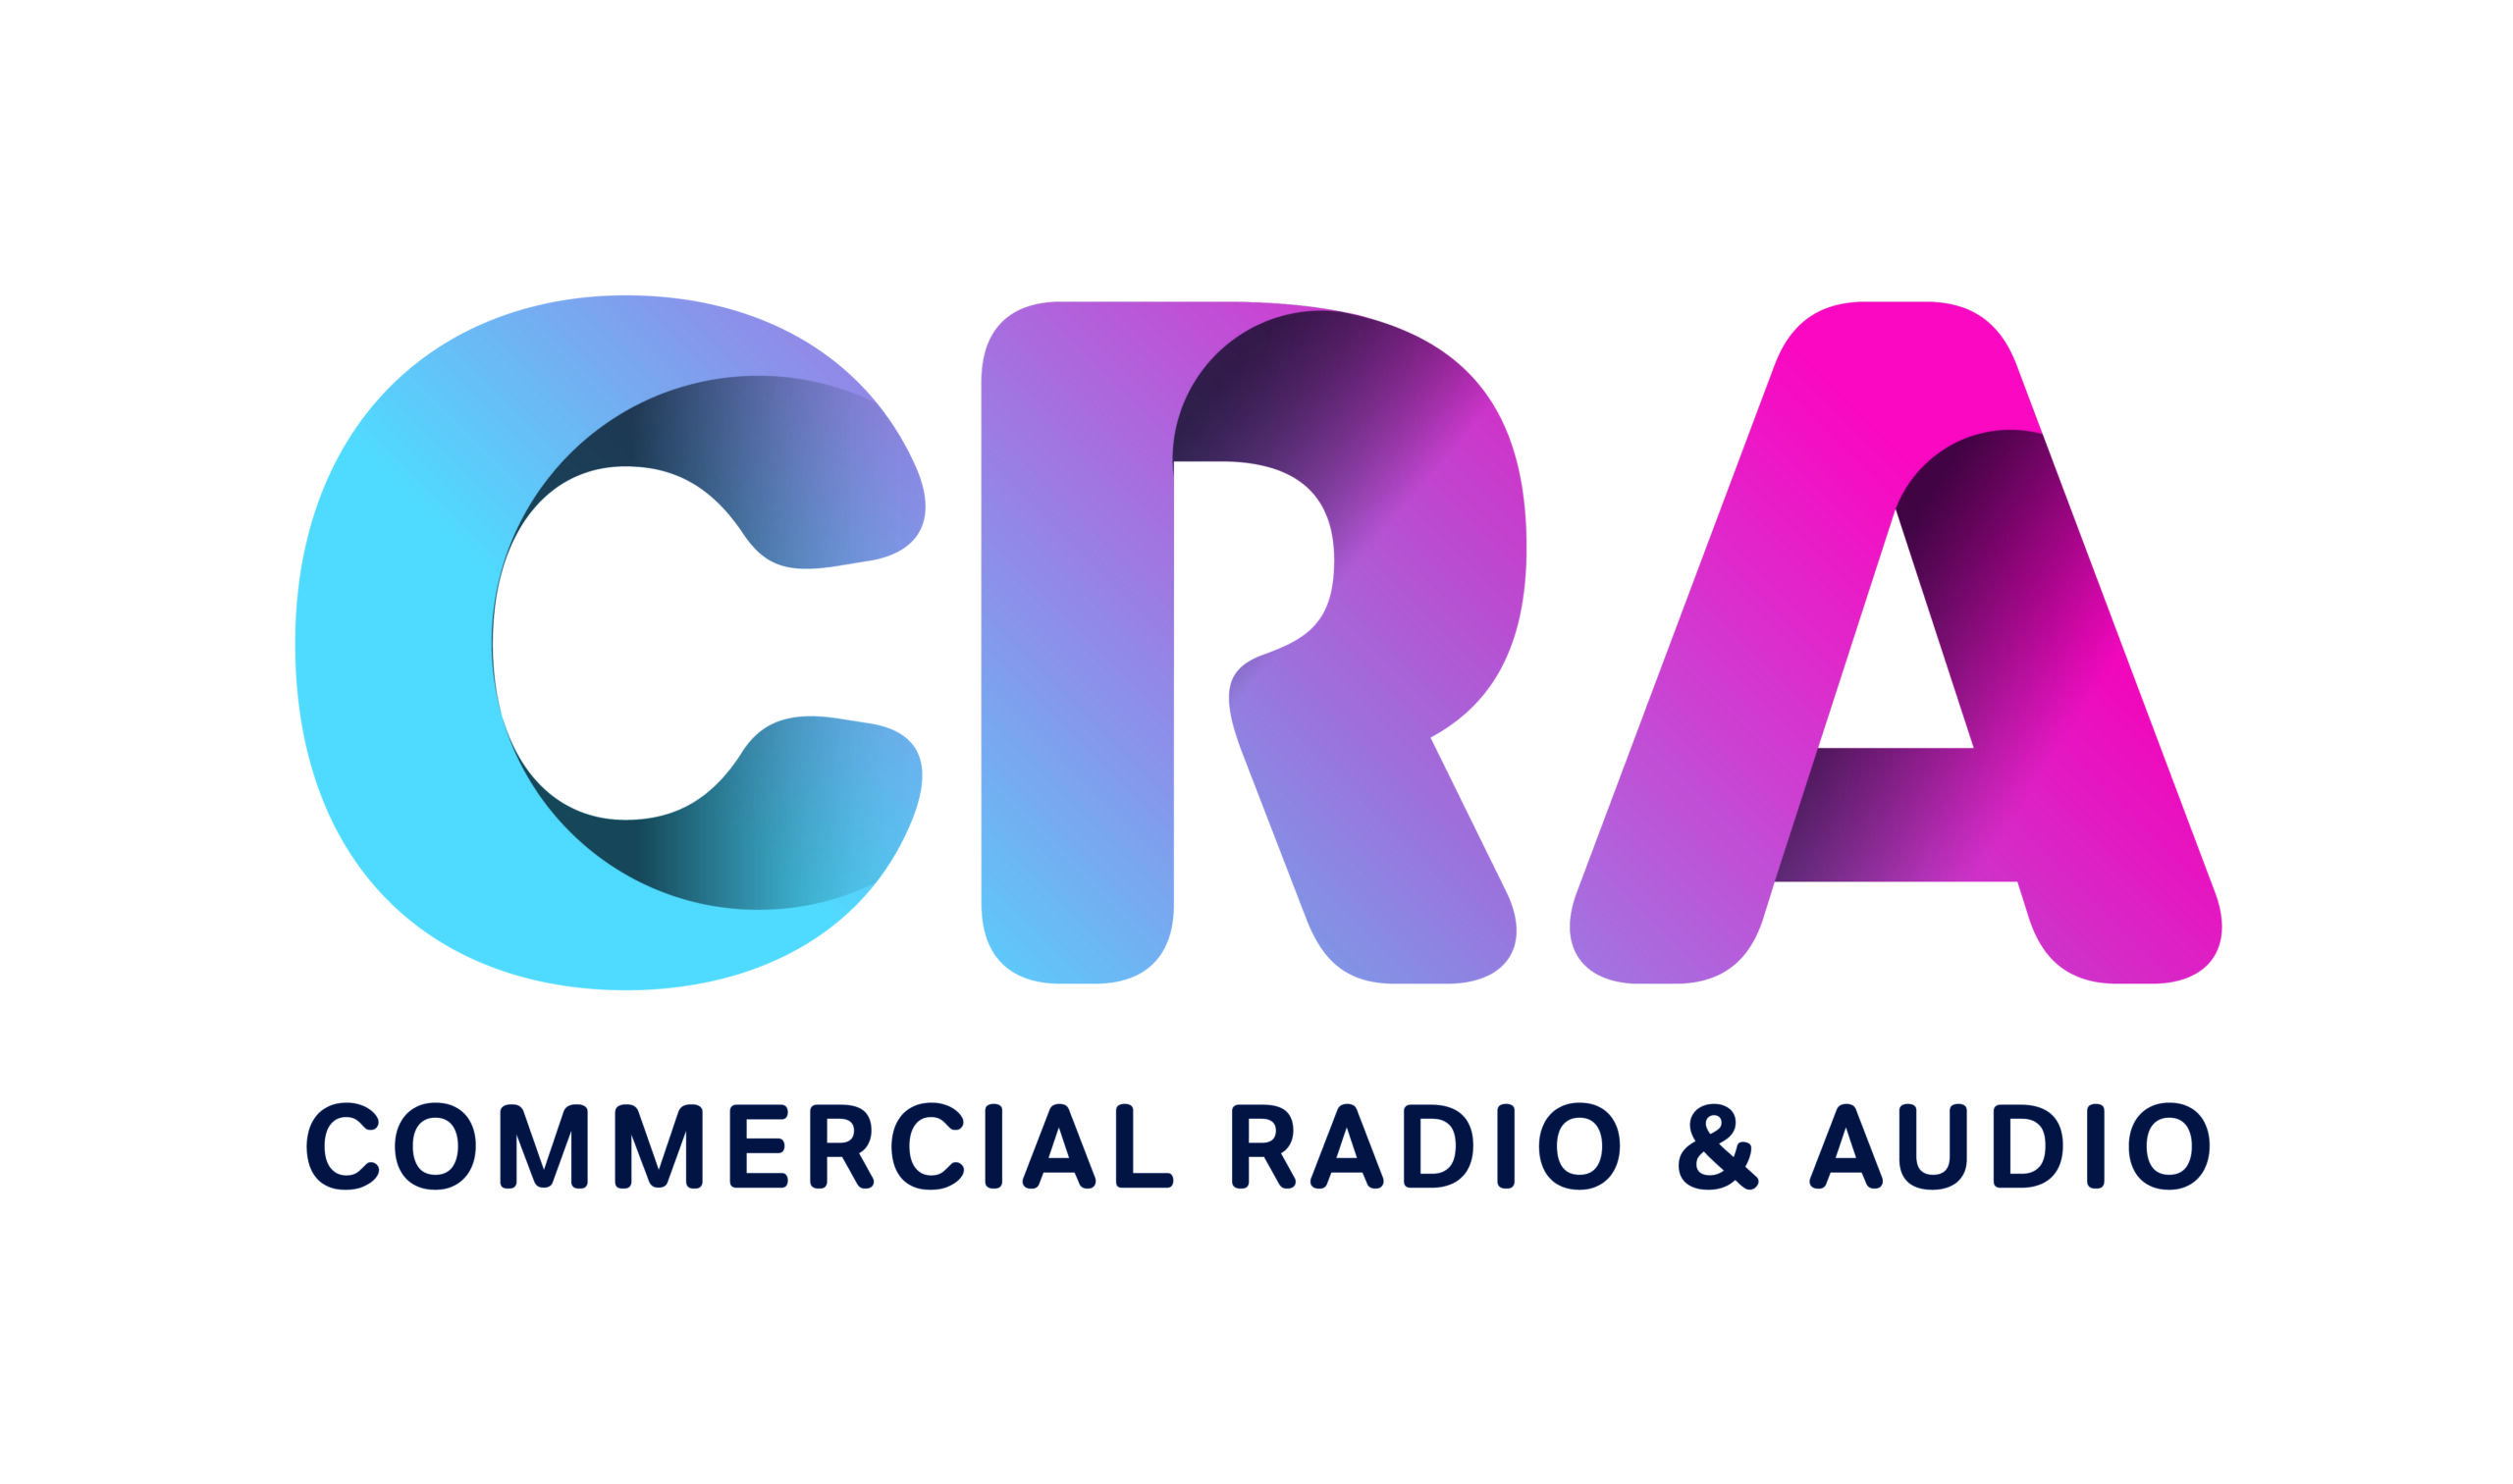 Commcercial Radio and Audio